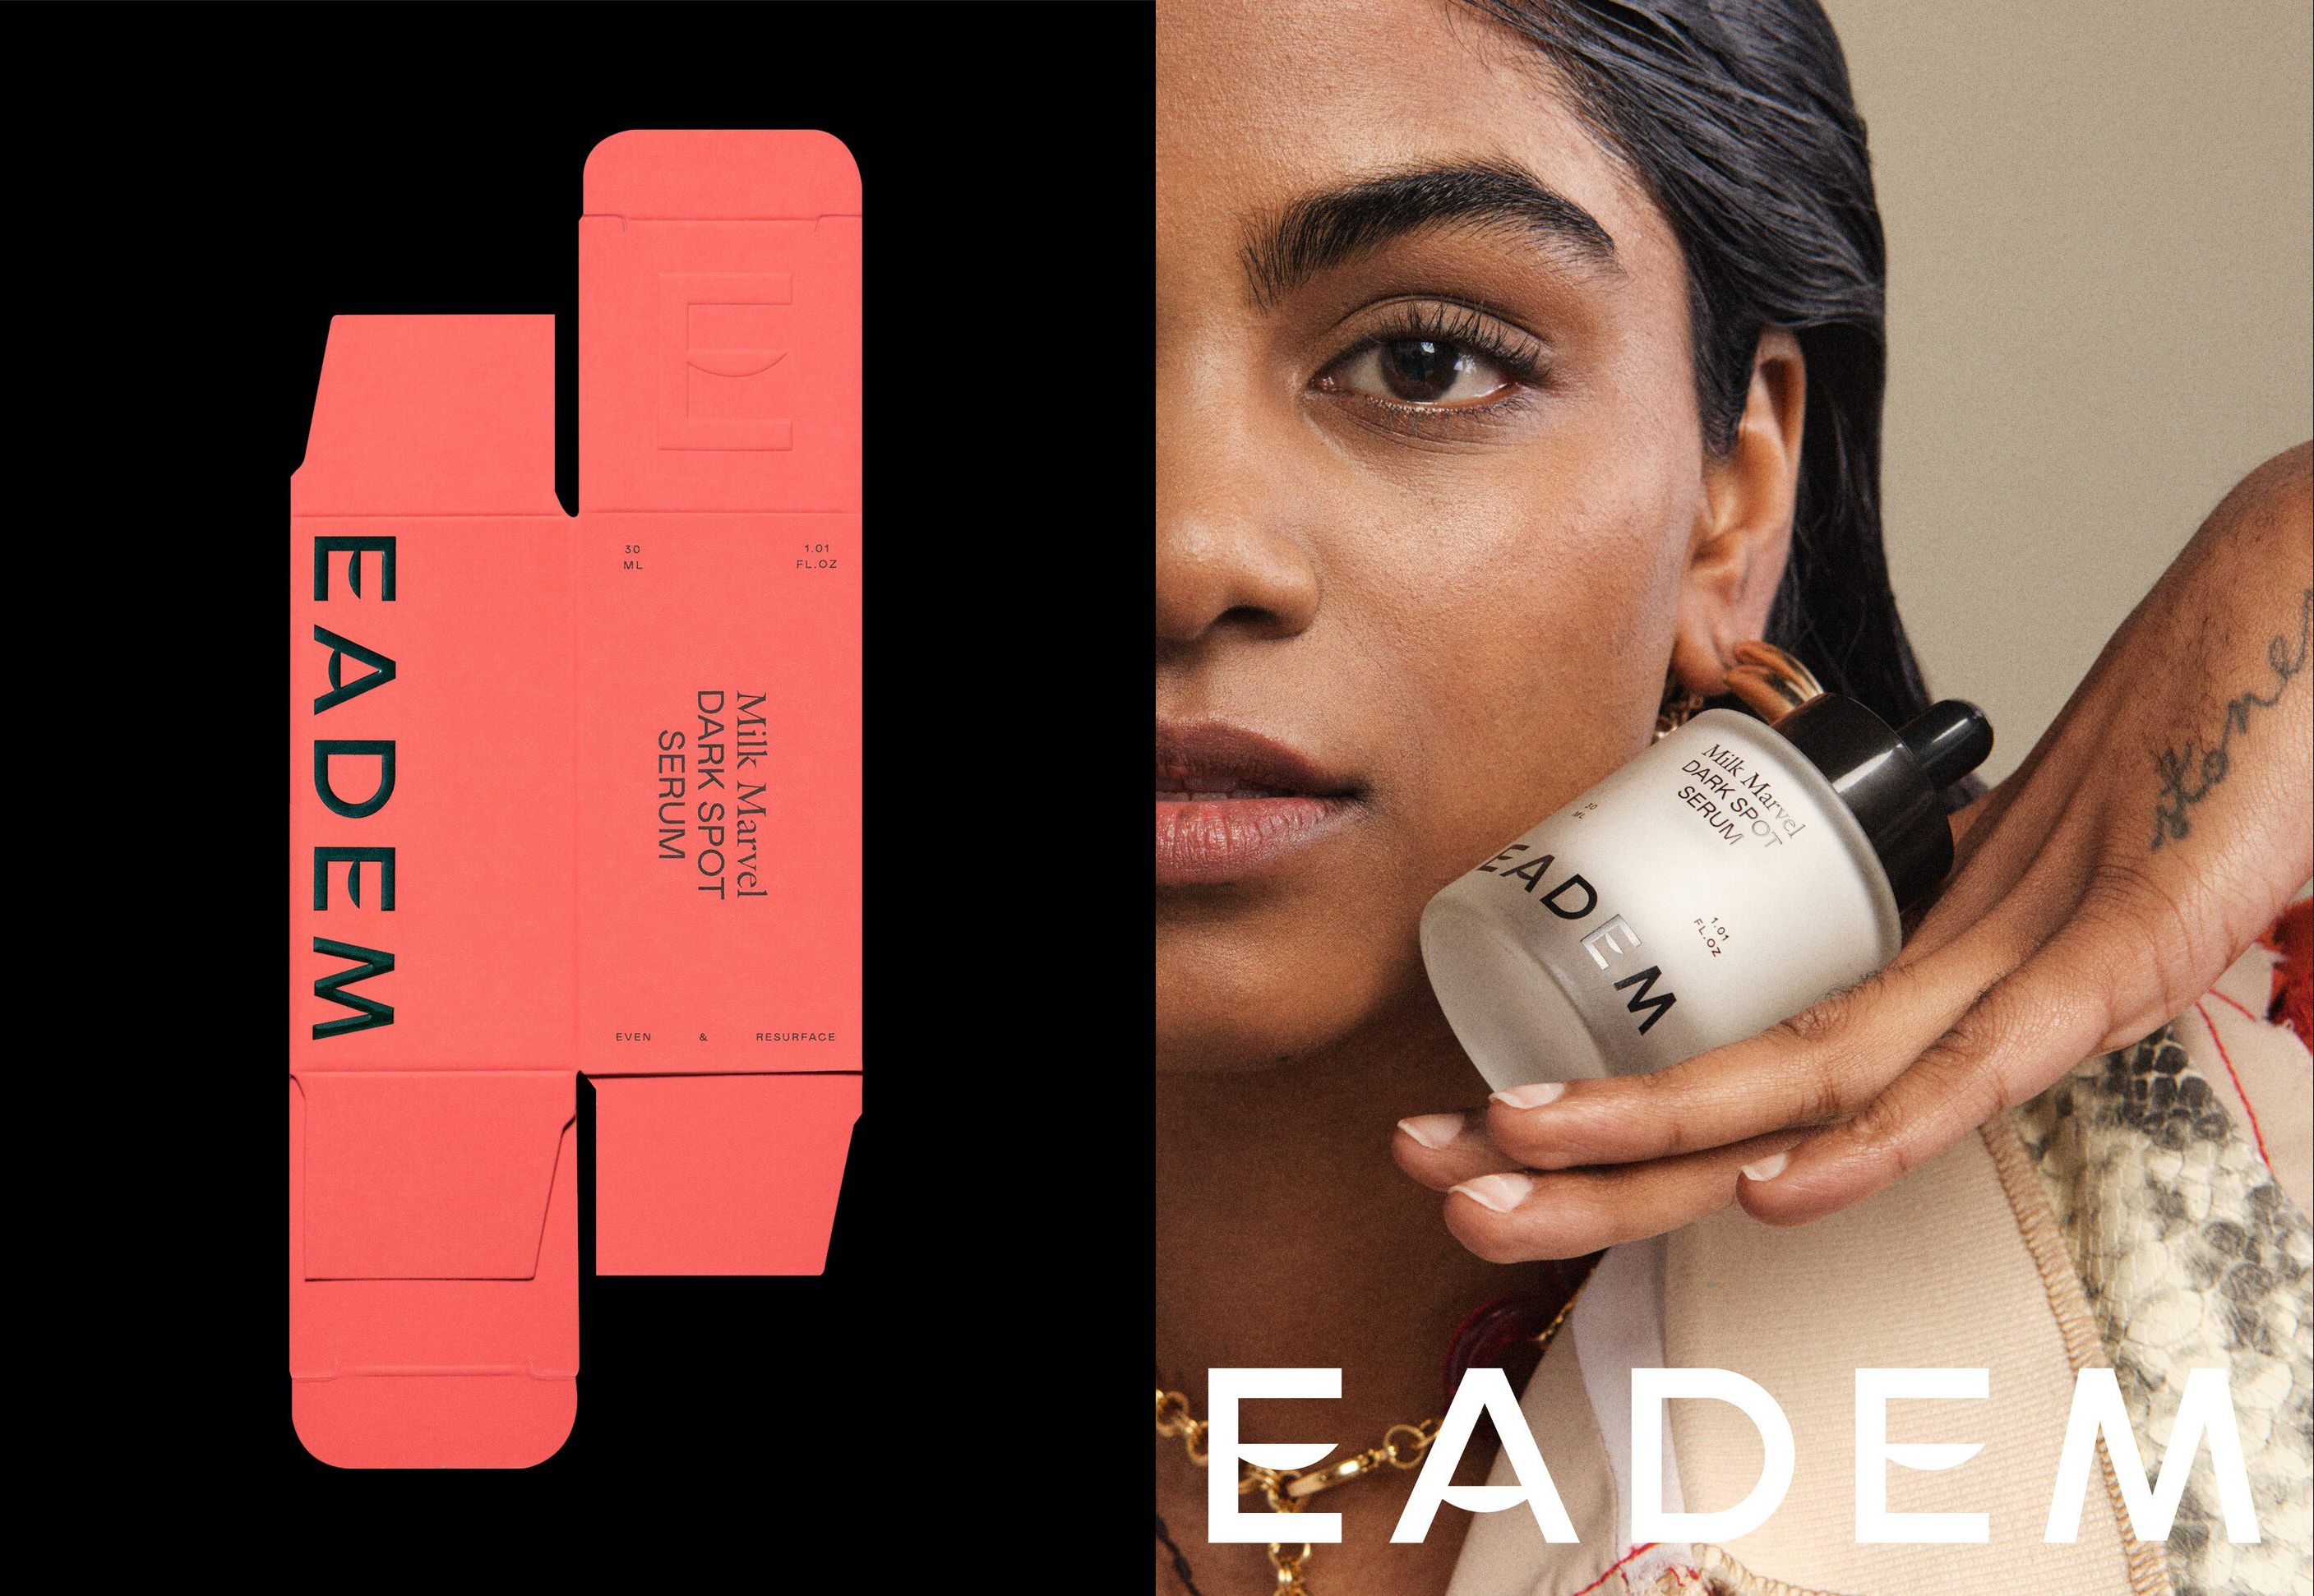 Eadem – Beauty brand for people of colour. Pink, black foil and blind embossed packaging design by New York and Parisian based Lotta Nieminen. Reviewed by Kinda Sararino for BP&O